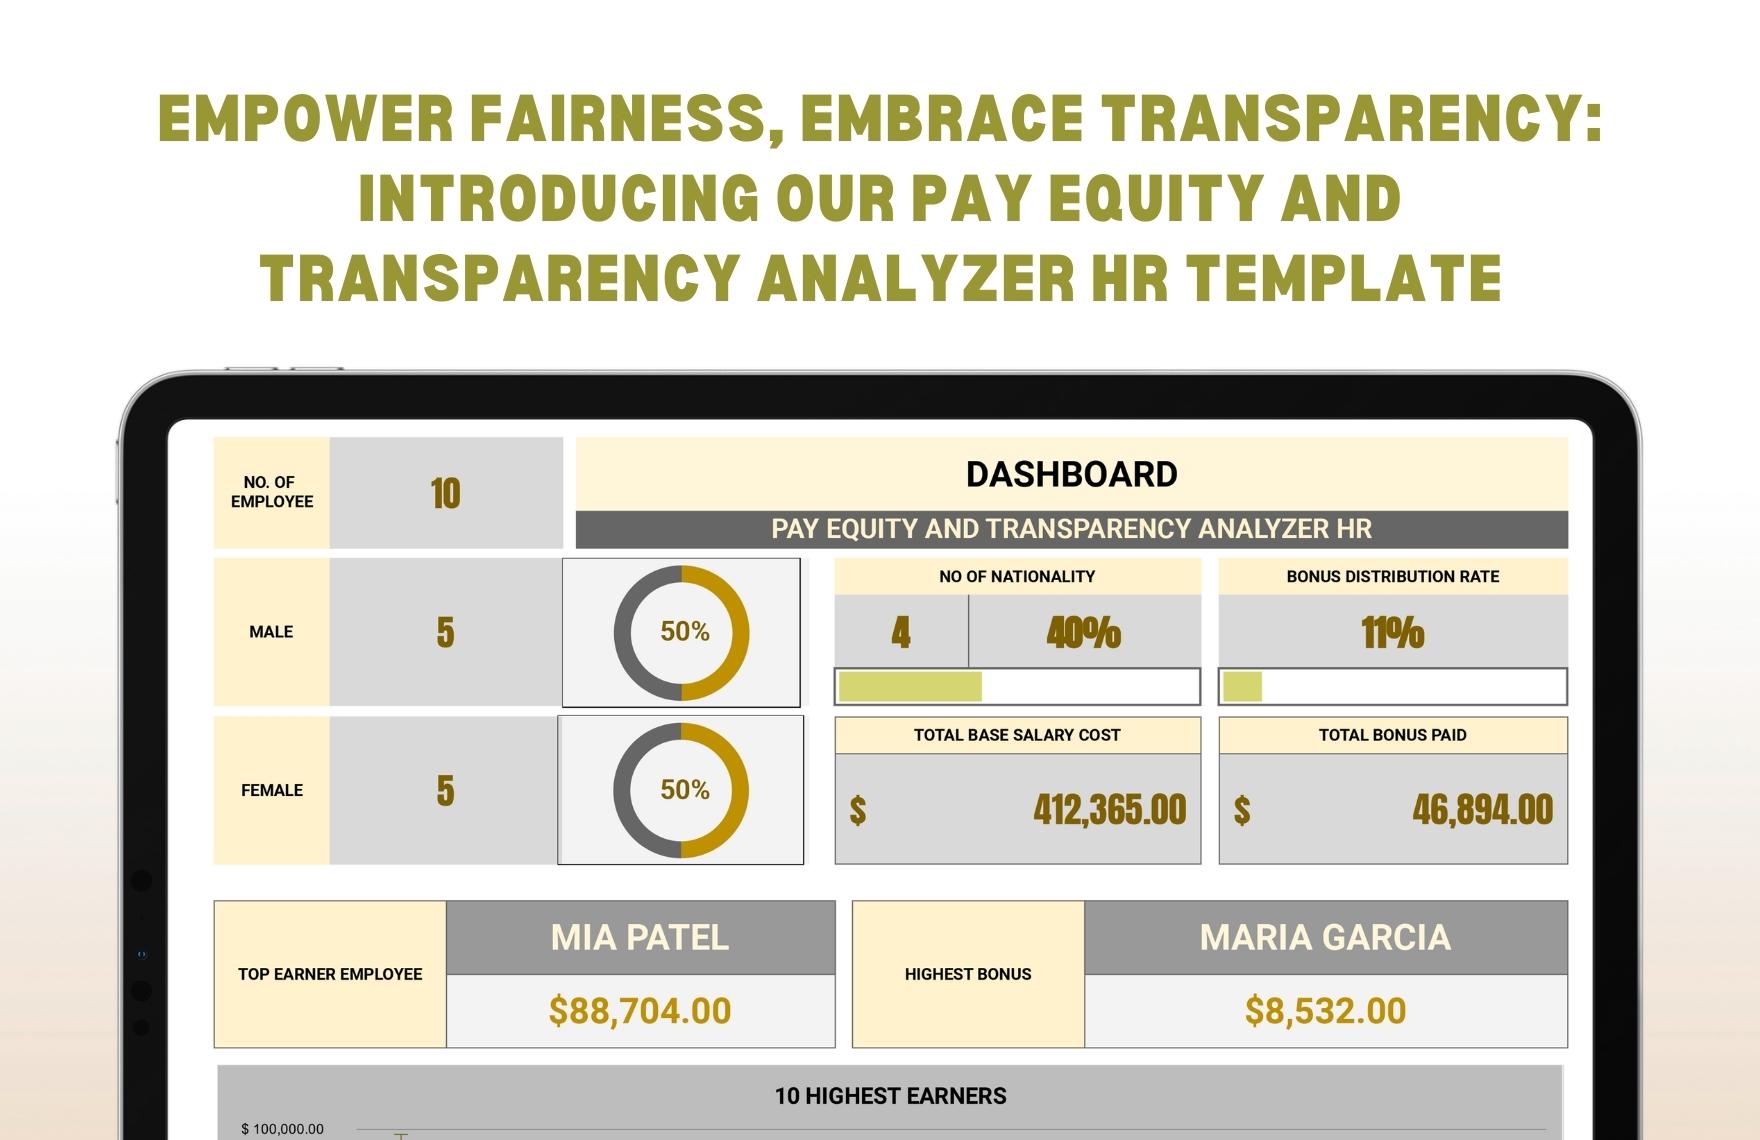 Pay Equity and Transparency Analyzer HR Template